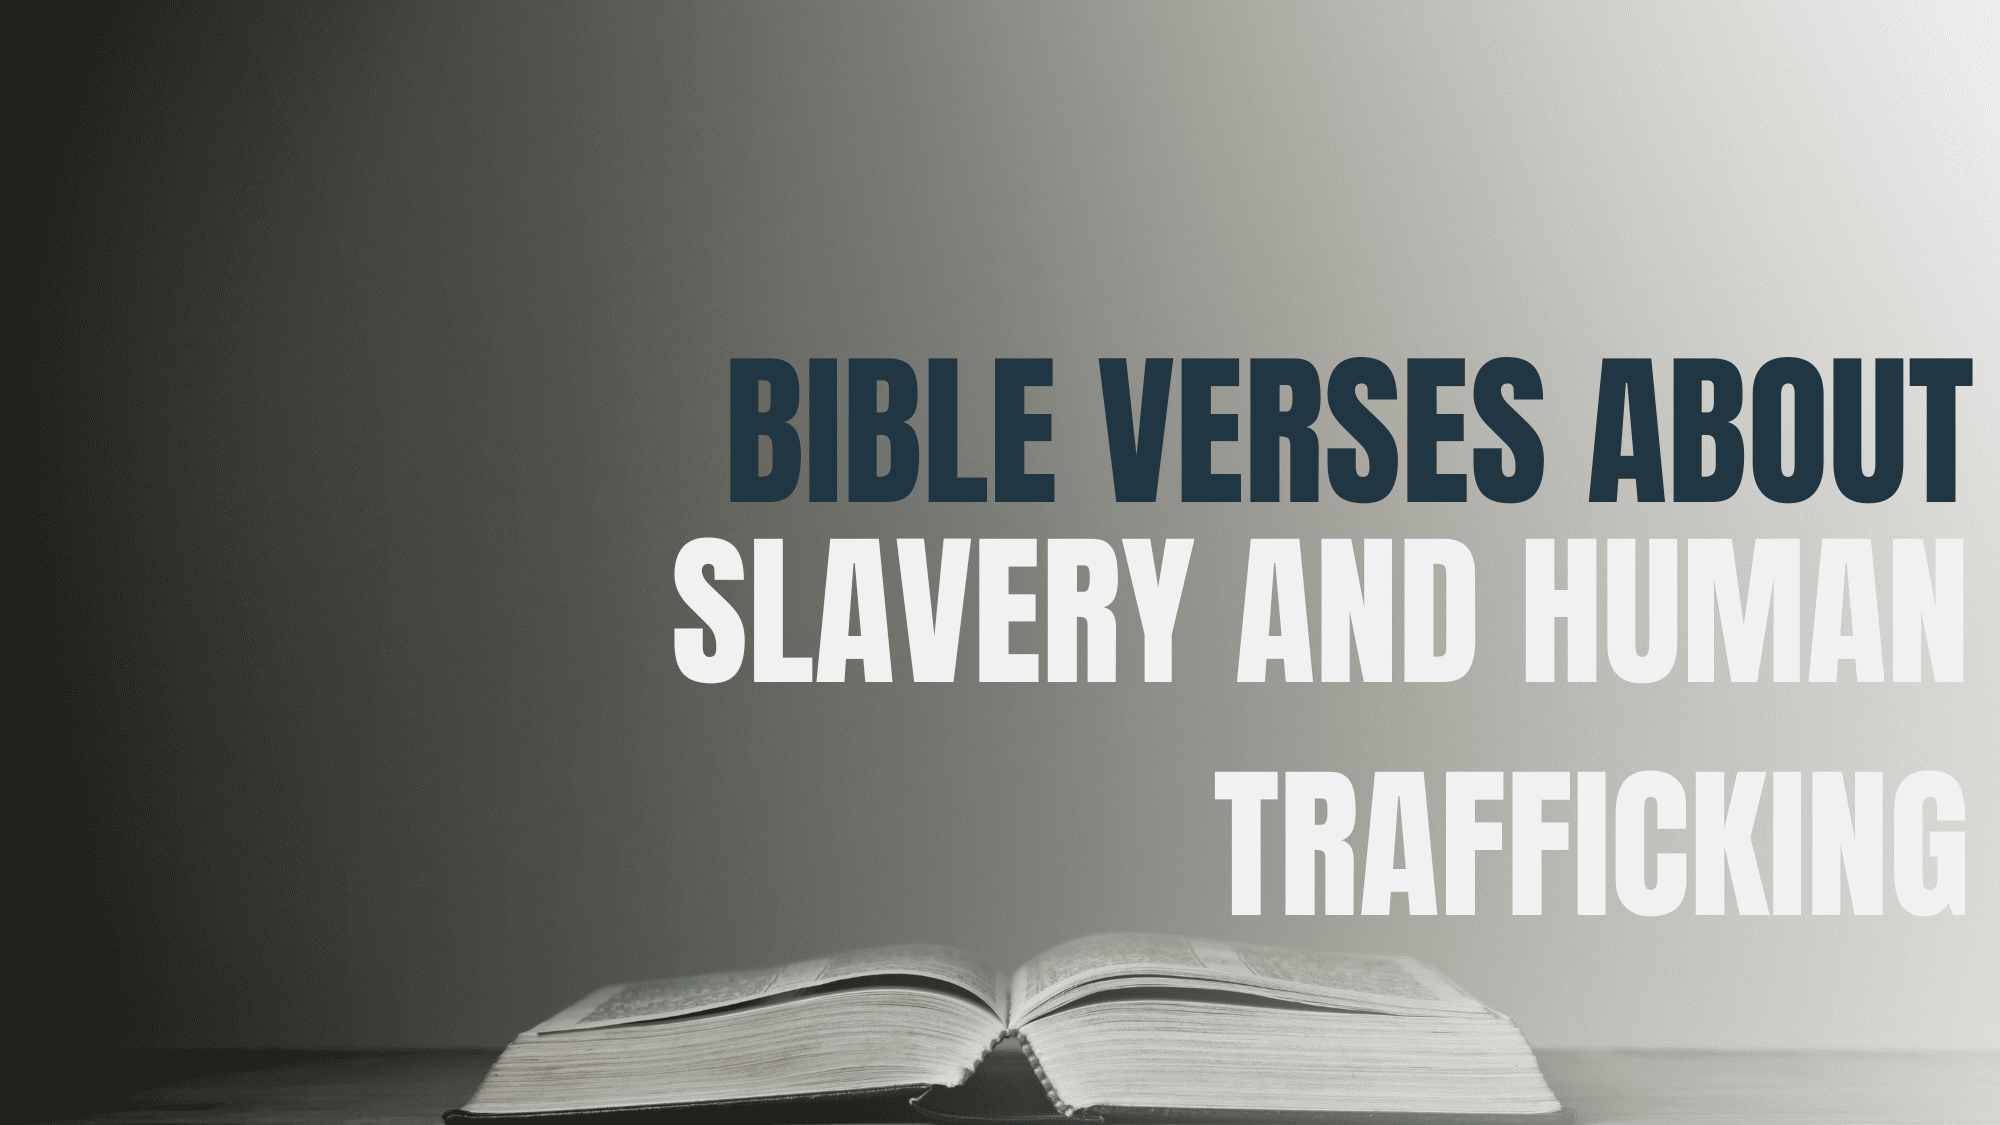 23 Bible Verses About Freedom — What Scripture Says About Freedom